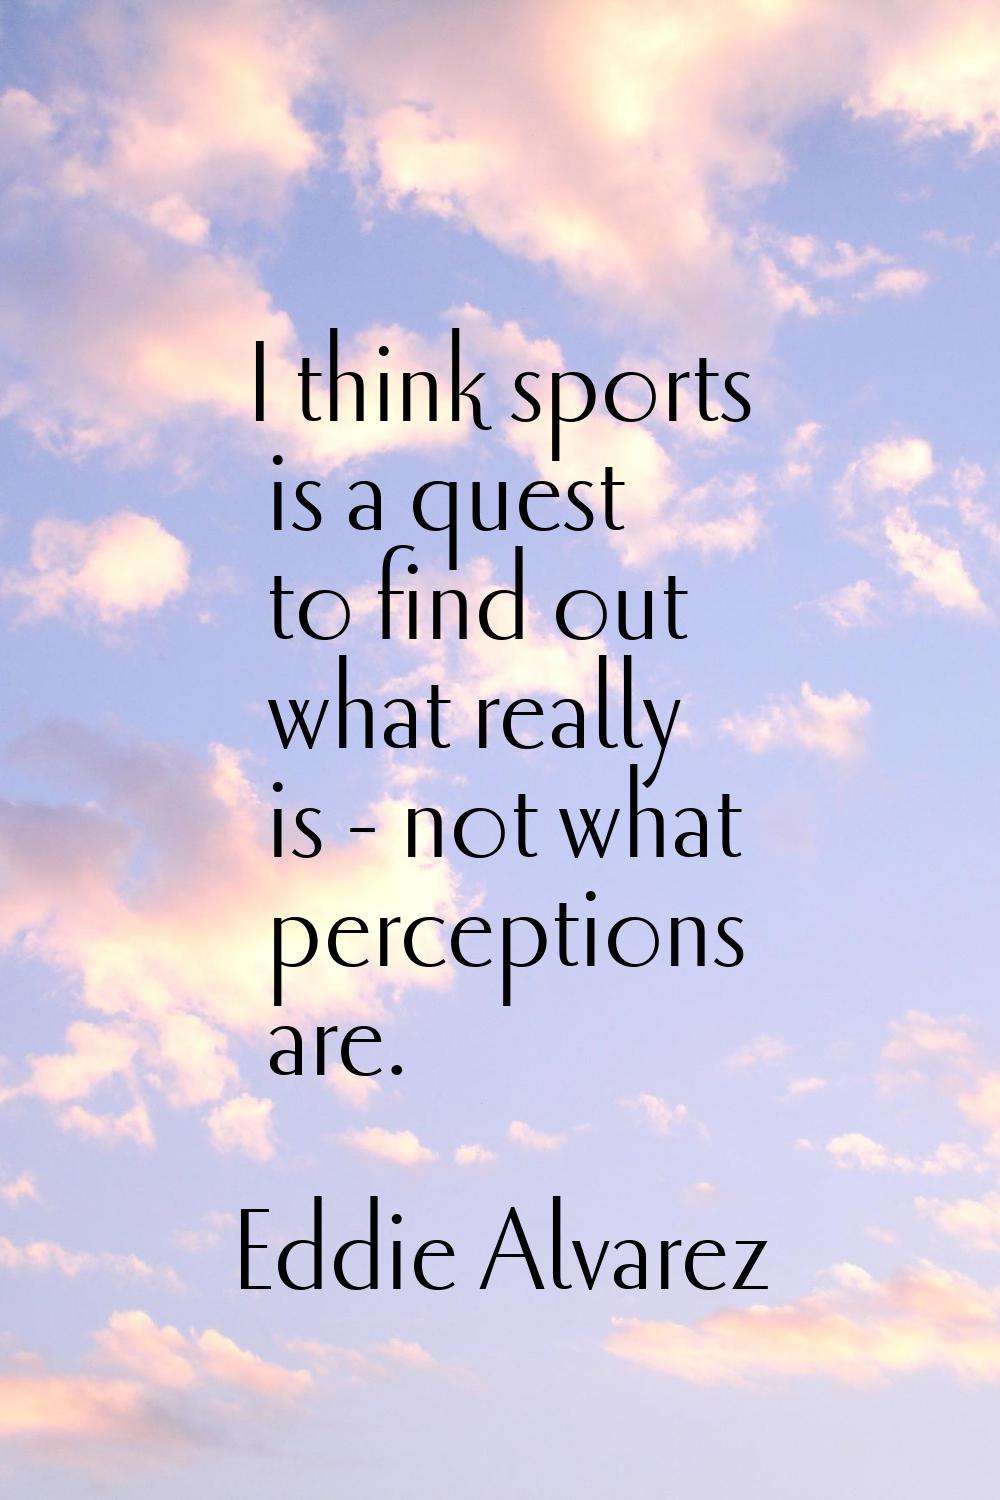 I think sports is a quest to find out what really is - not what perceptions are.